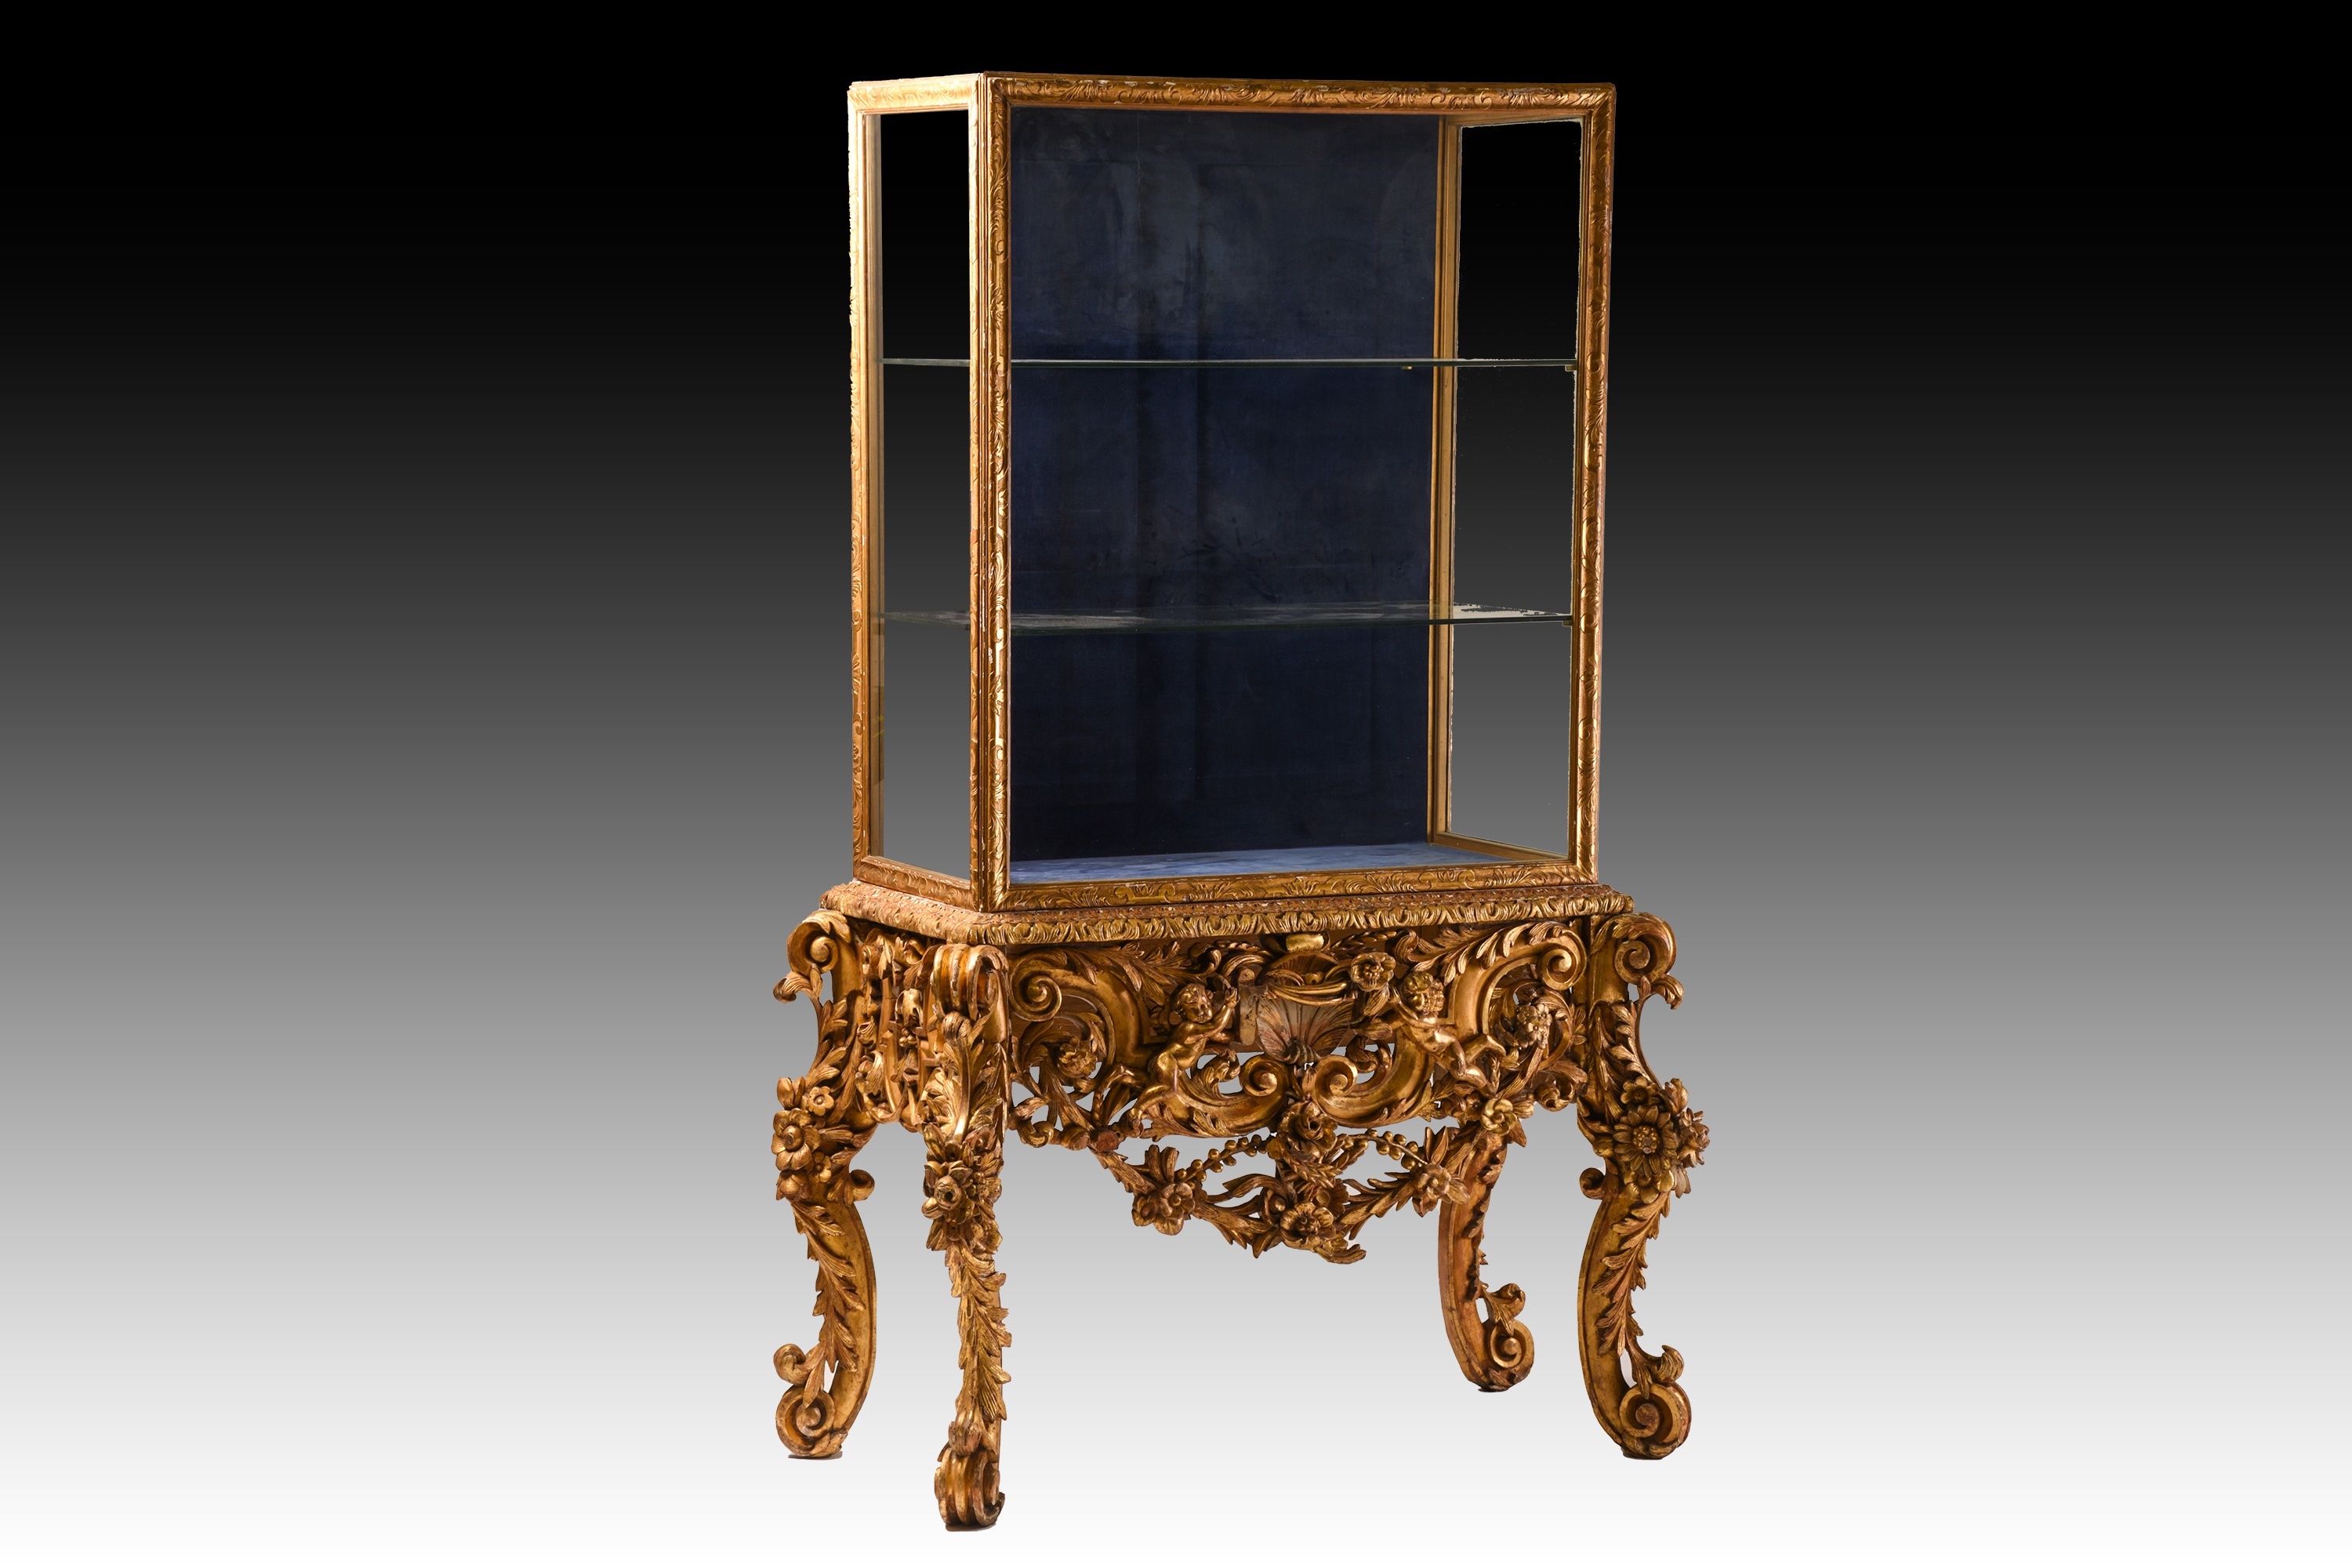 A 17th-century Italian style carved wood and gilt gesso vitrine